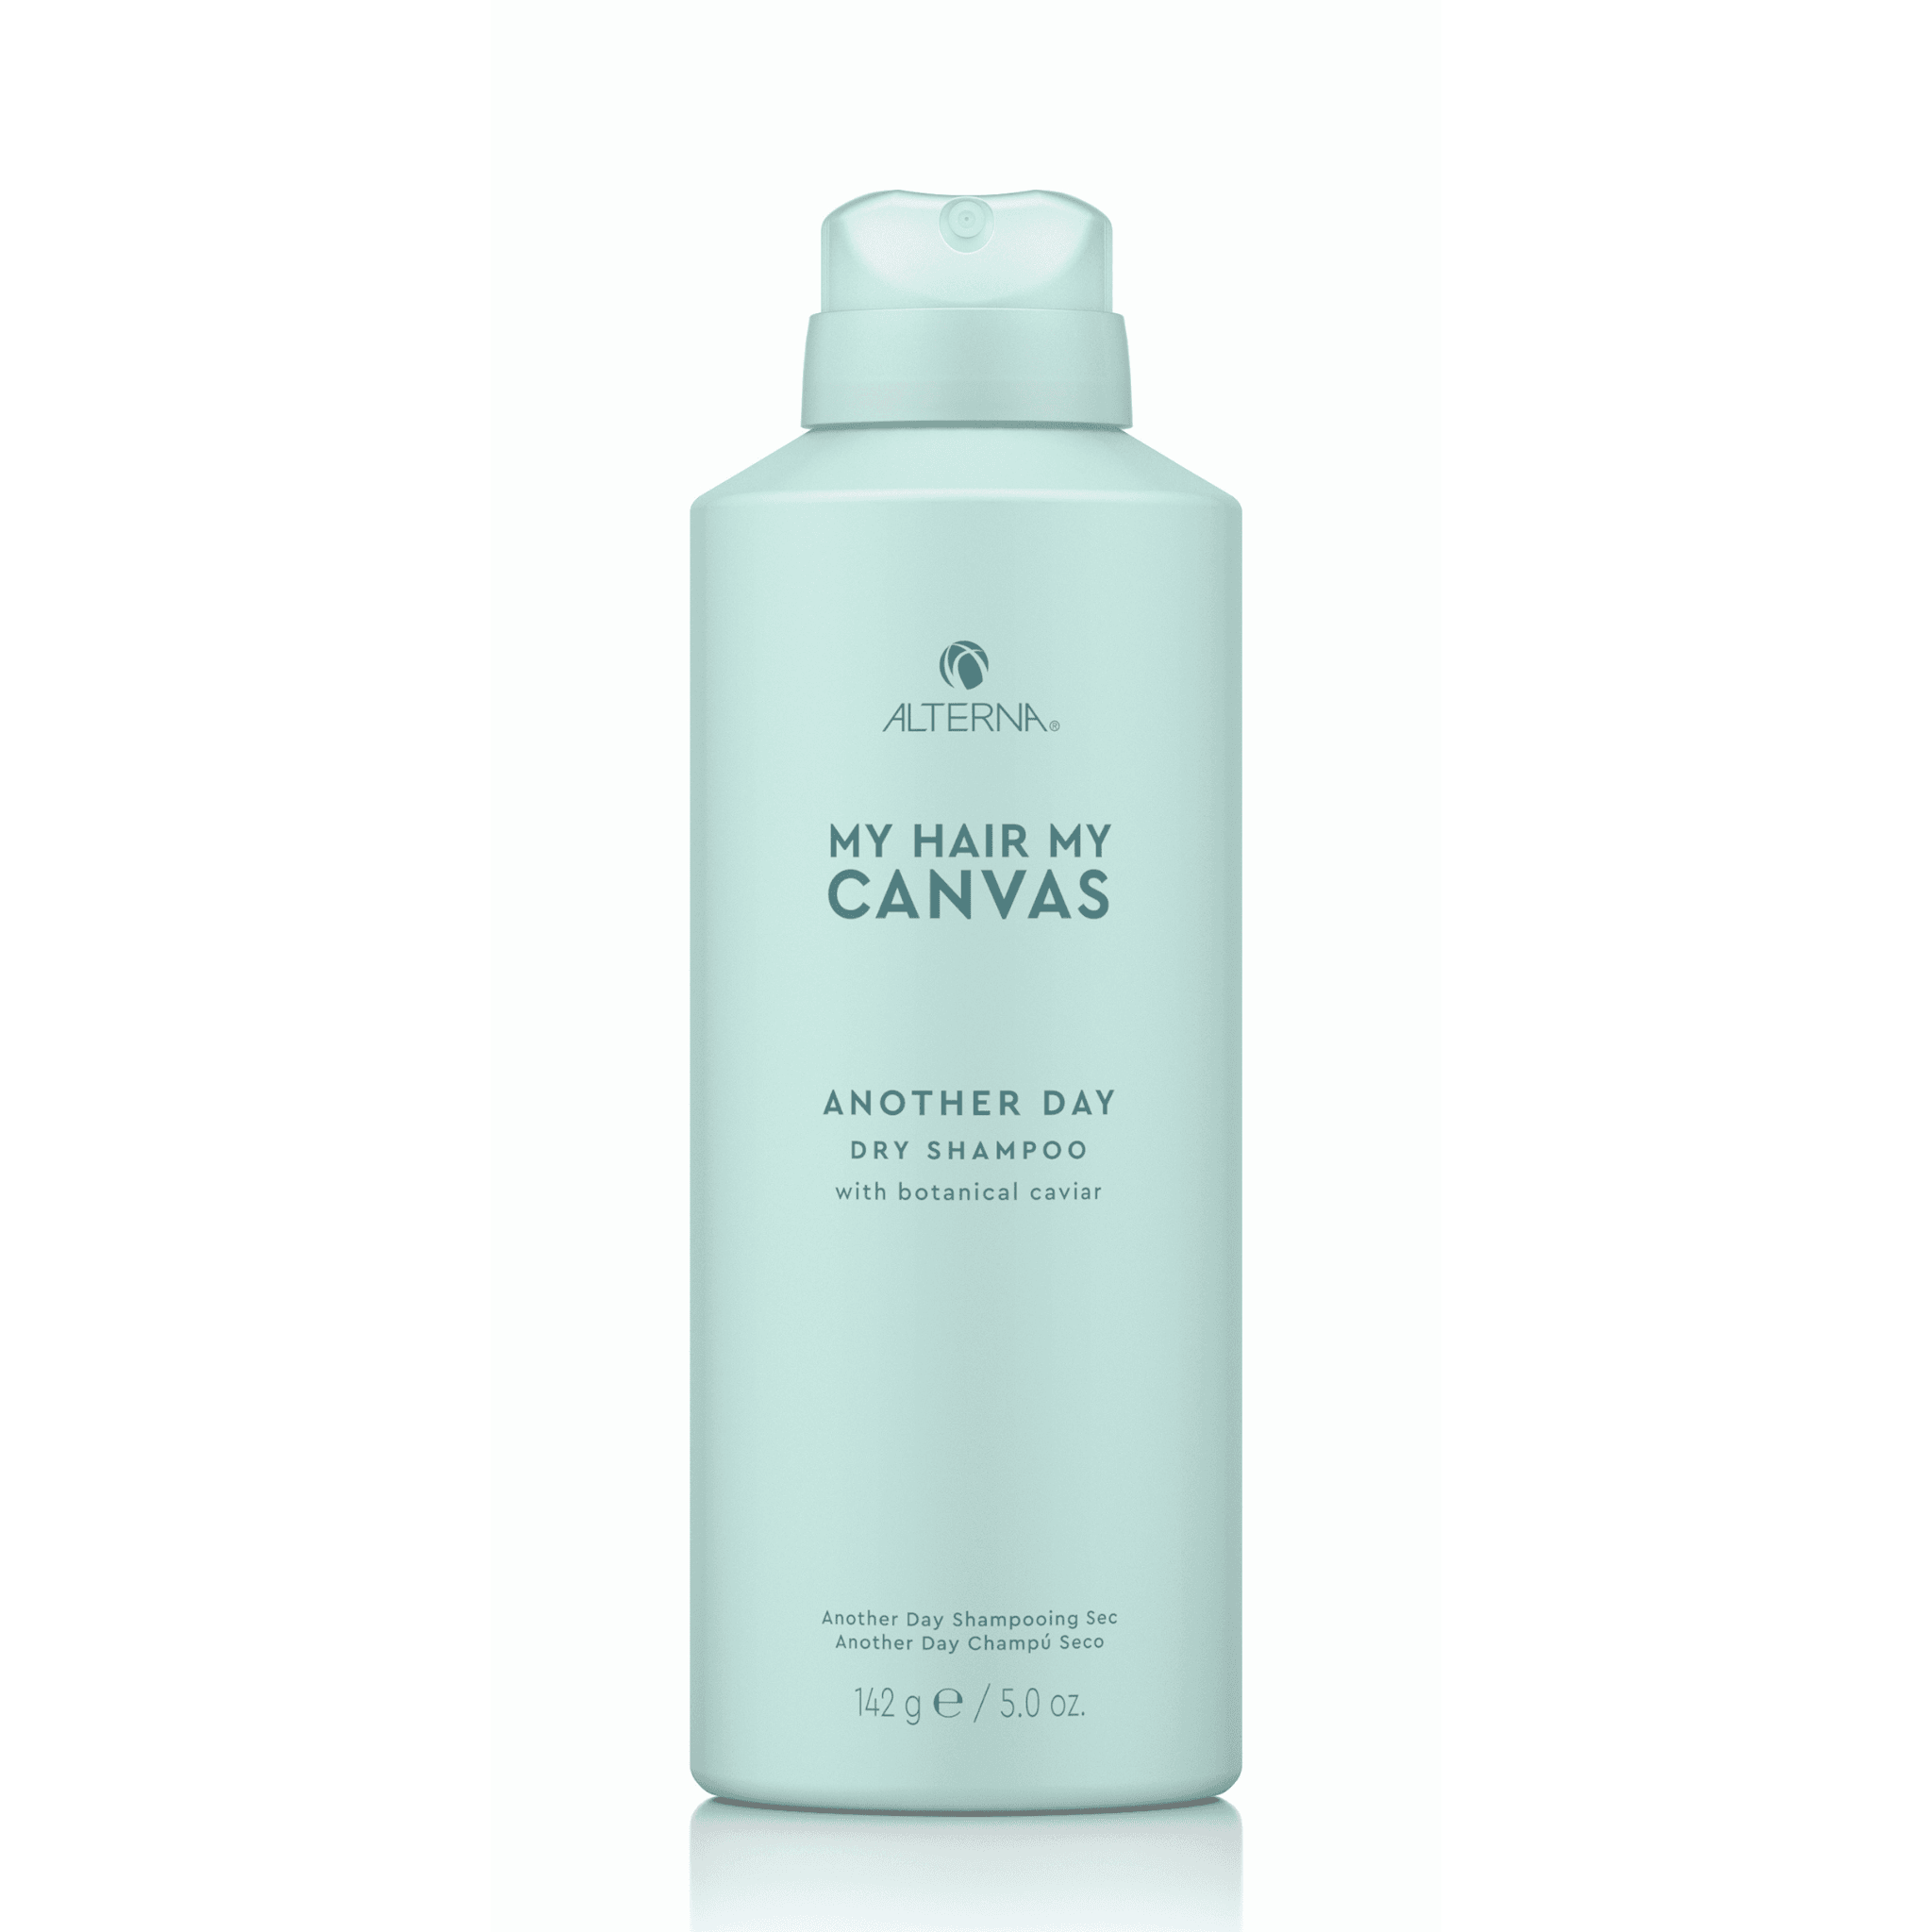 Alterna. My Hair My Canvas Shampoing Sec Another Day - 142 gr - Concept C. Shop